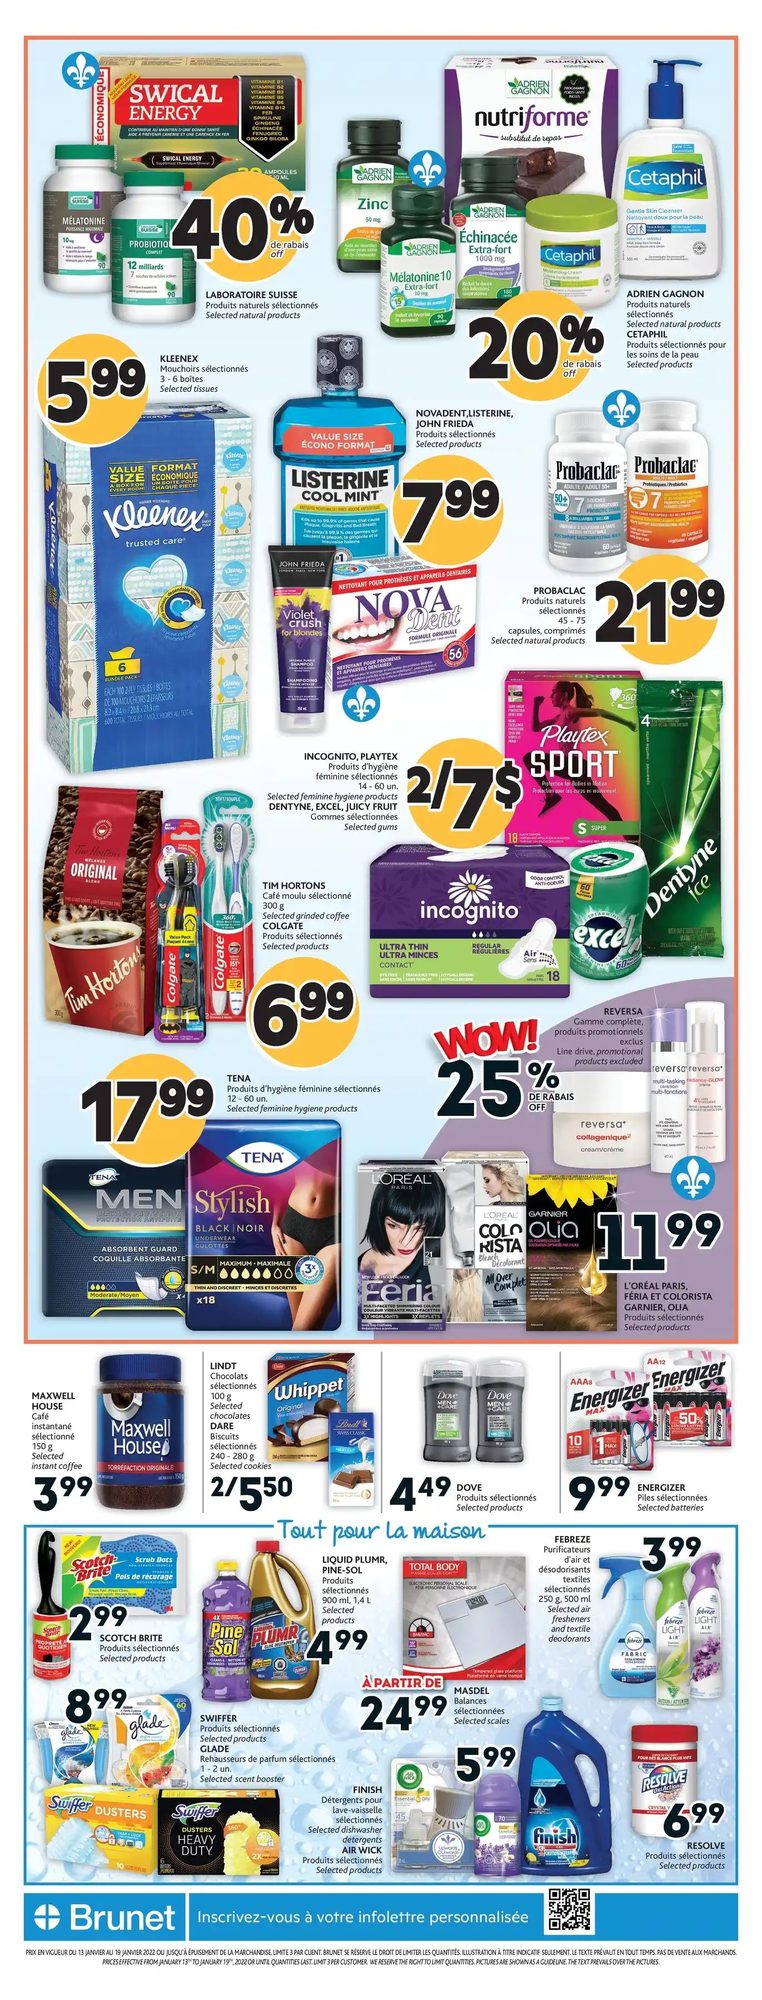 Brunet - Weekly Flyer Specials - Page 3